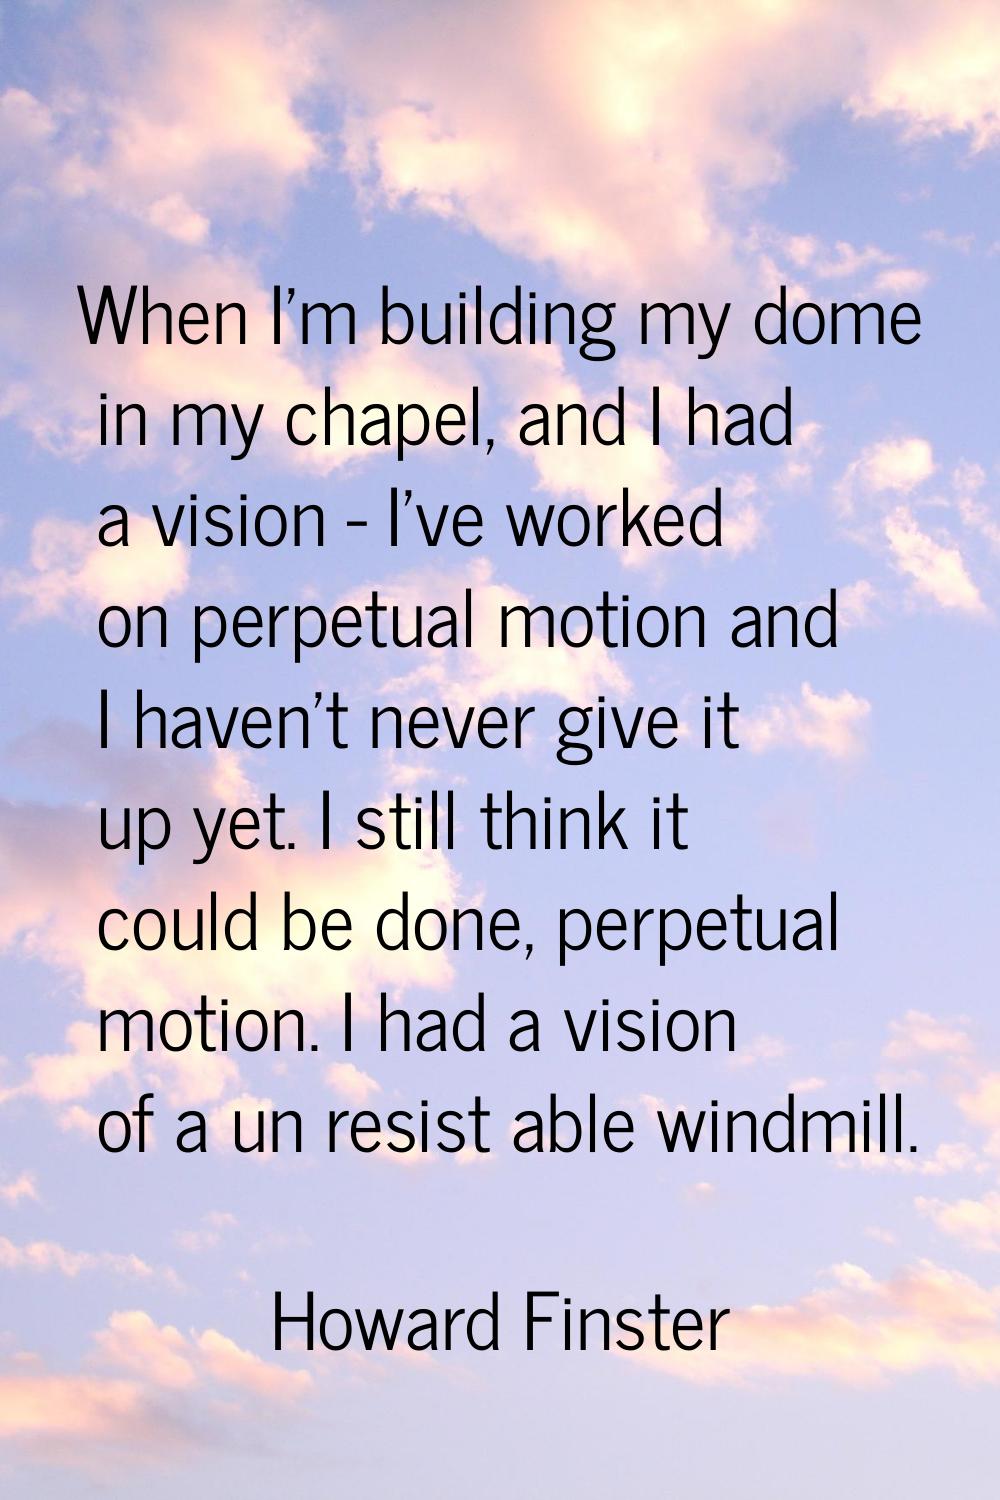 When I'm building my dome in my chapel, and I had a vision - I've worked on perpetual motion and I 